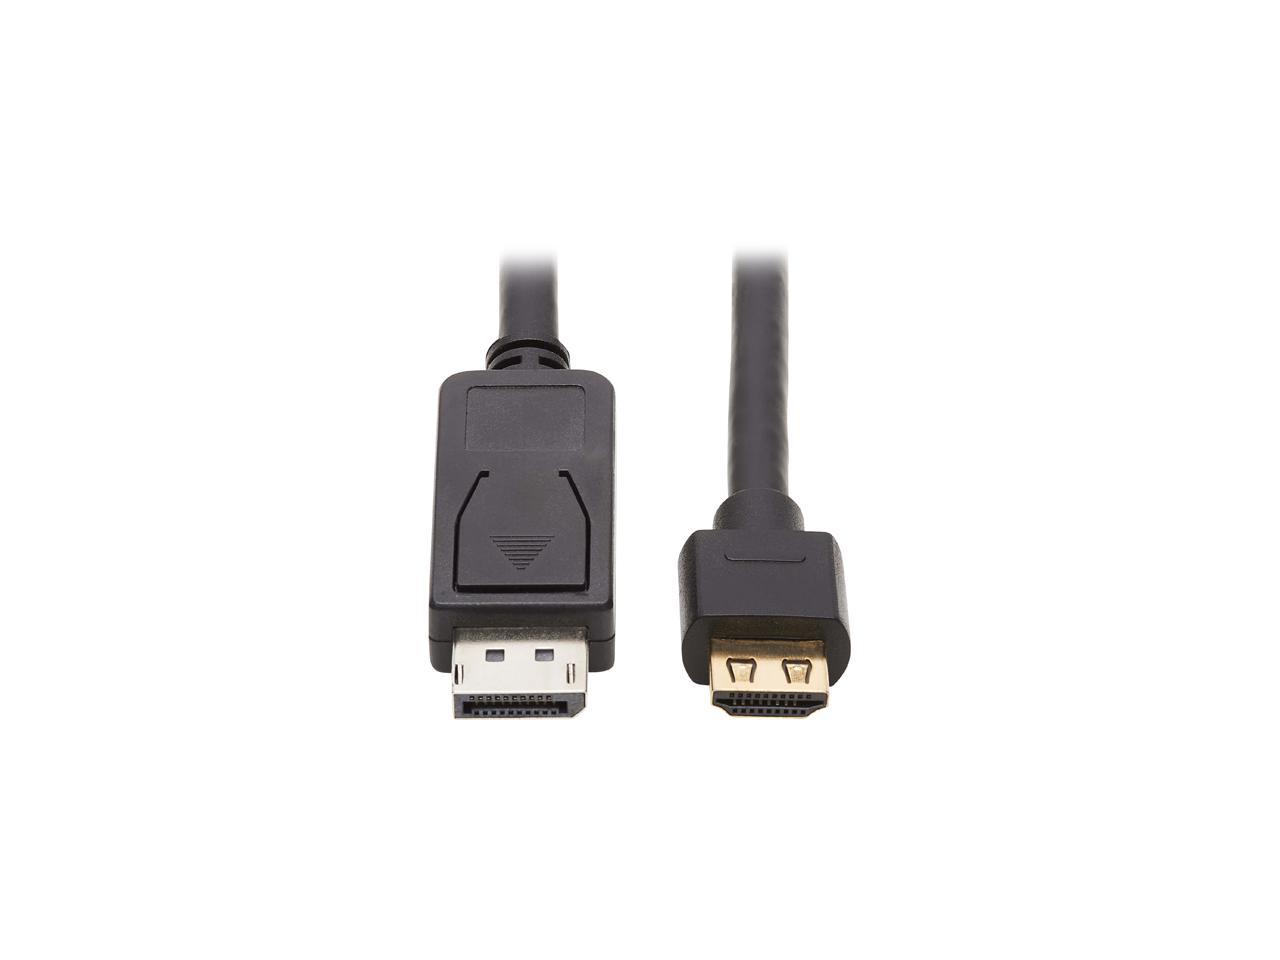 Tripp Lite P582-010-4K6AE 10 ft. DisplayPort 1.2a to HDMI 2.0 Active Adapter Cable (M/M) - Grip HDMI Plug, 4K @ 60 Hz, 10 ft., Black - image 1 of 5